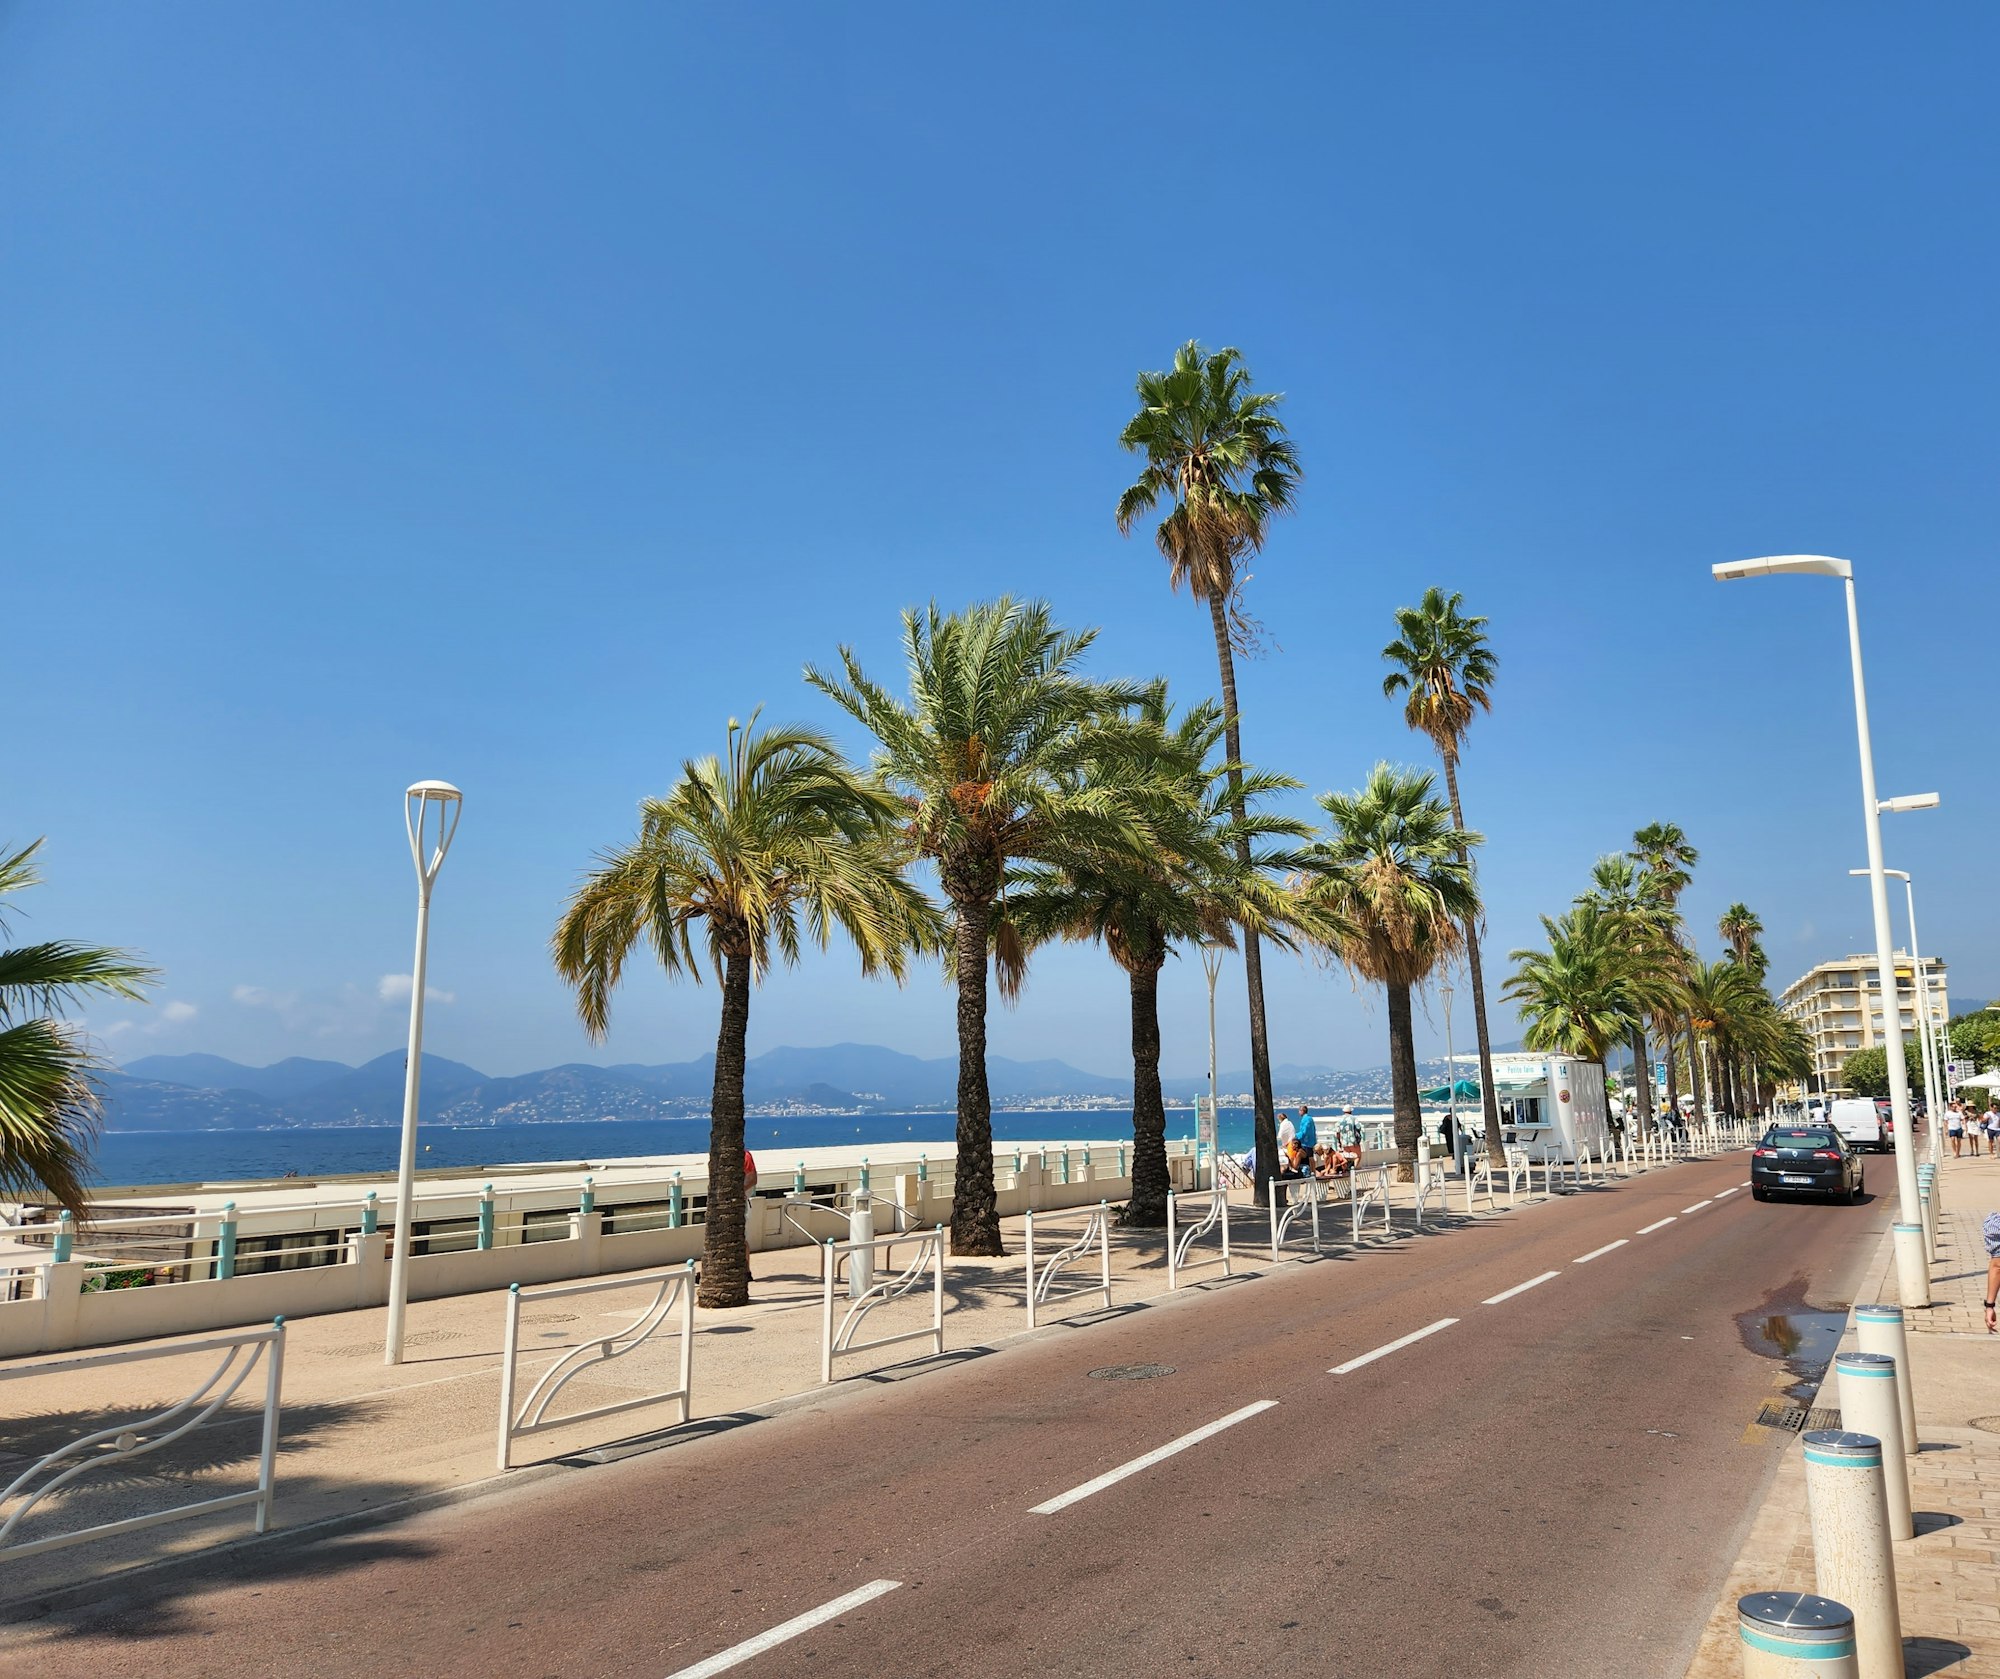 A road by the beach in Cannes, France